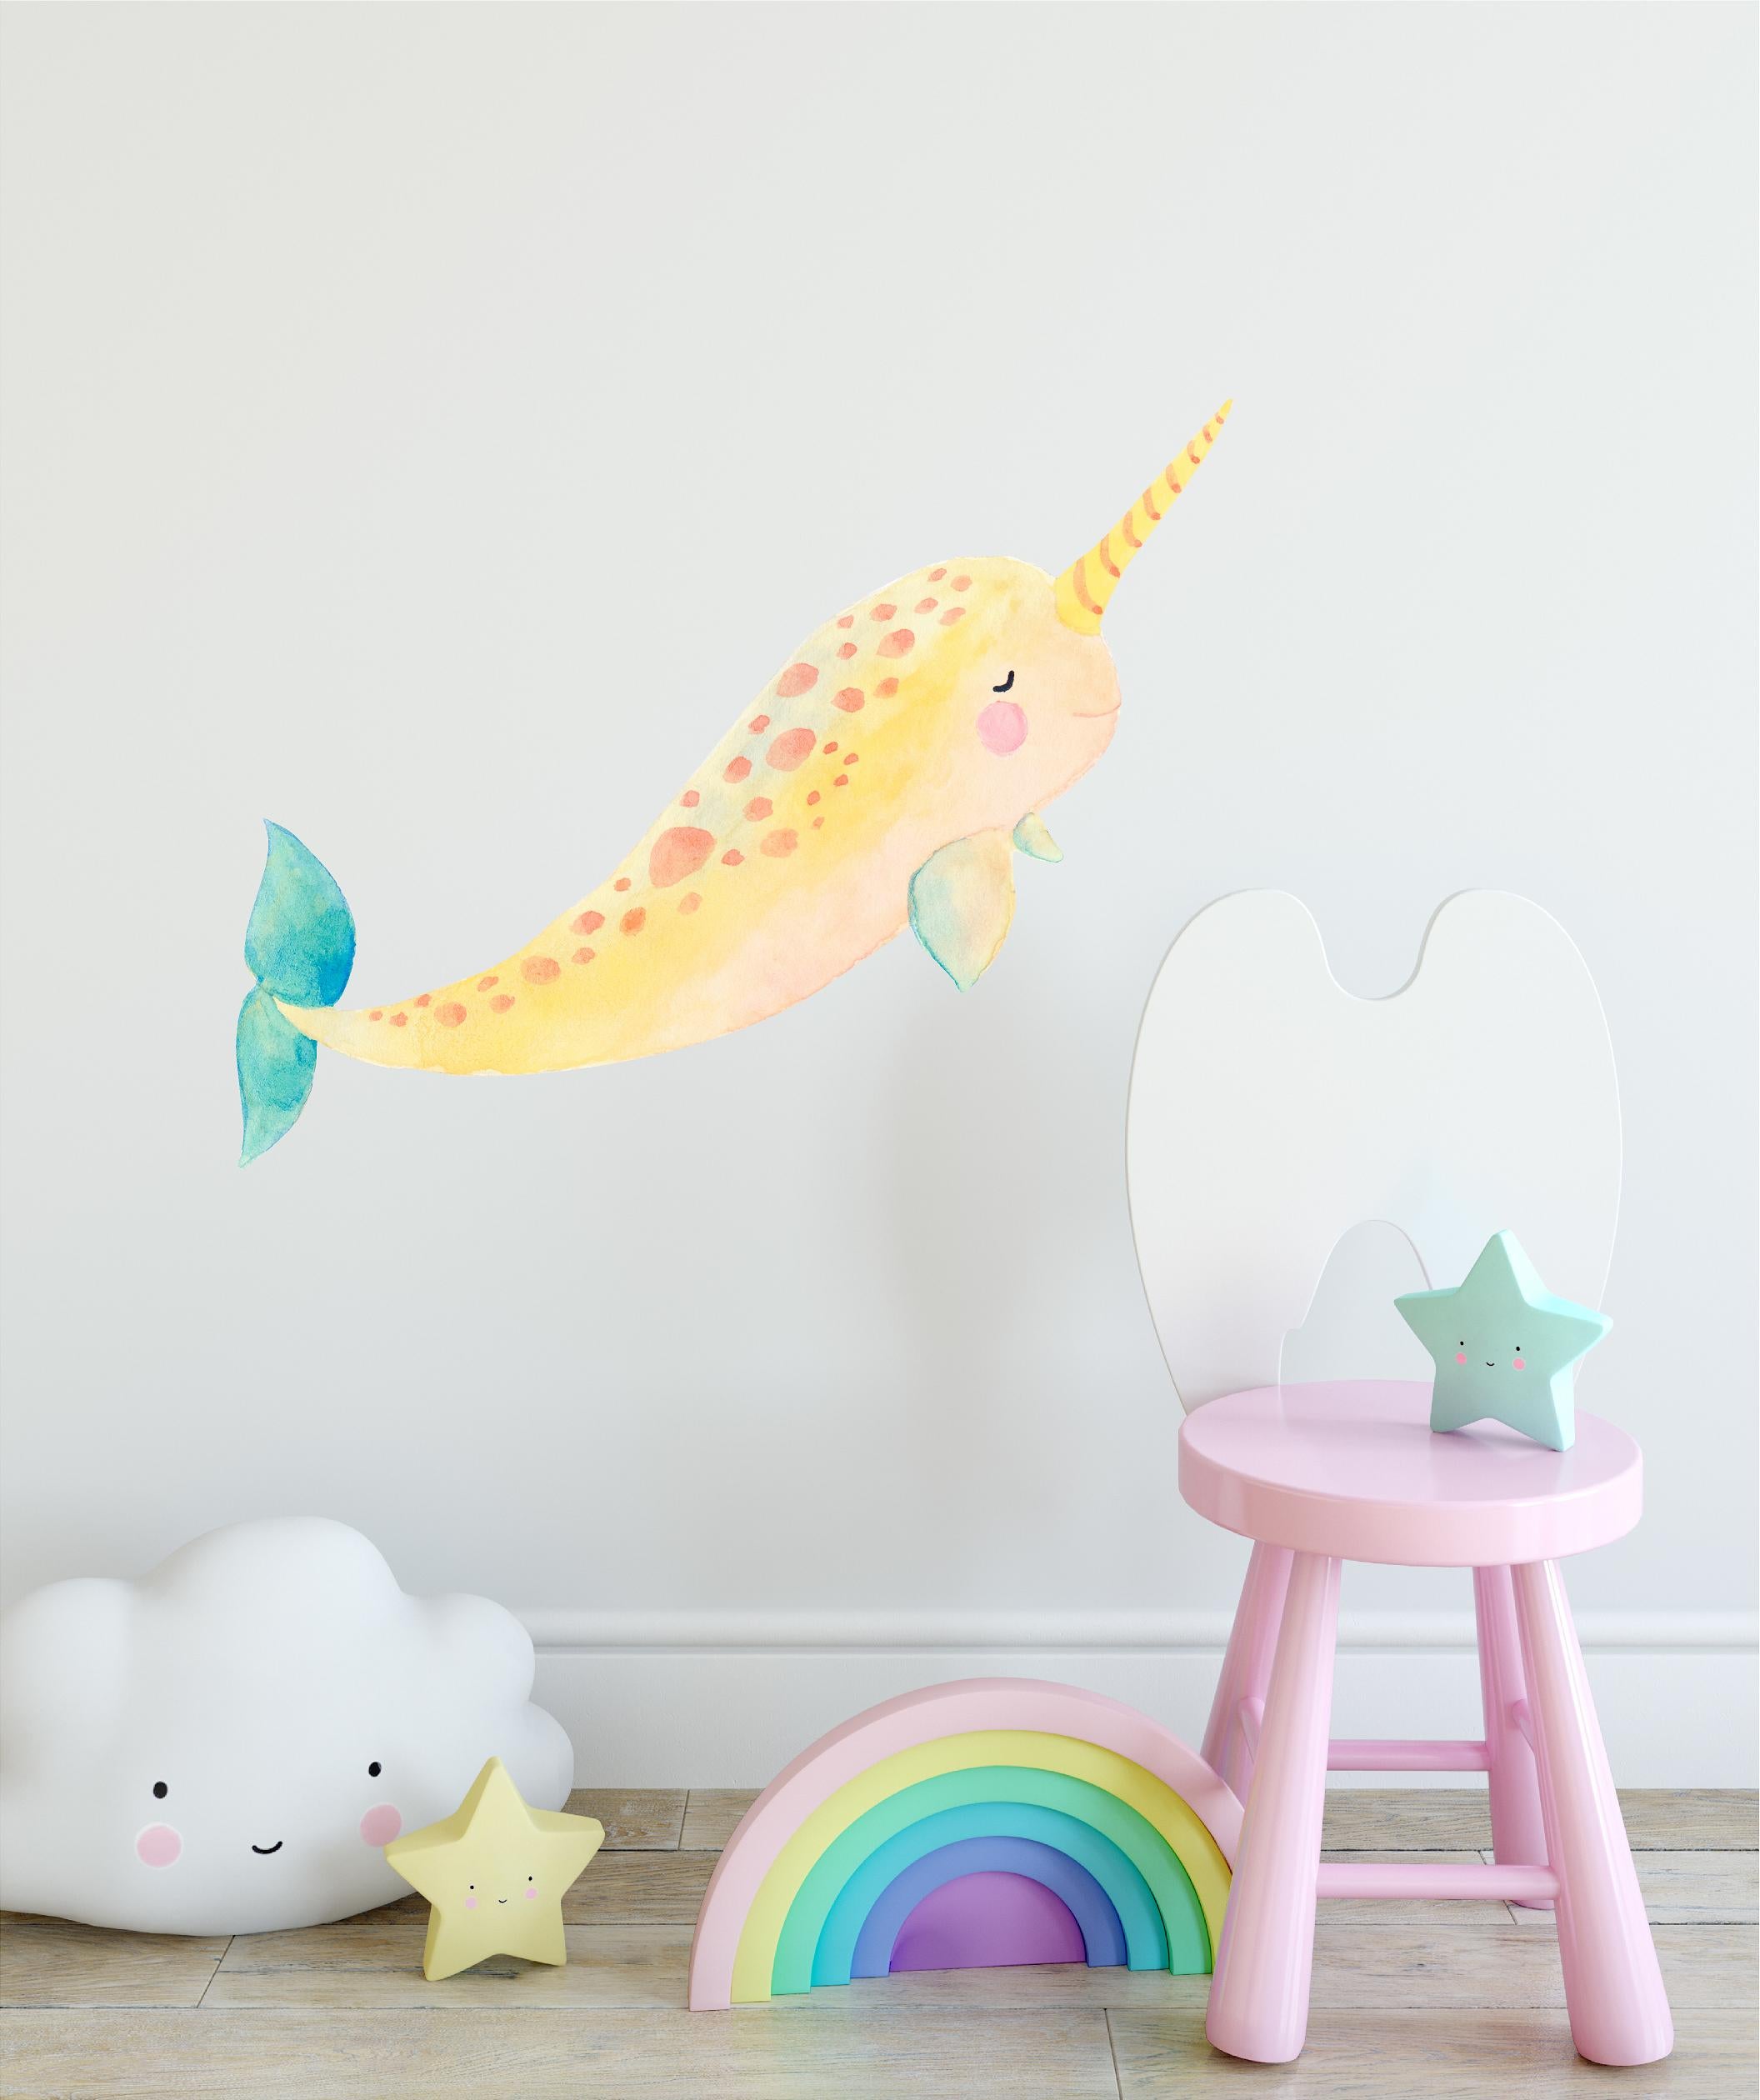 Pastel Narwhal Wall Decal Removable Fabric Vinyl Cute Watercolor Sea Animal Unicorn Wall Sticker | DecalBaby